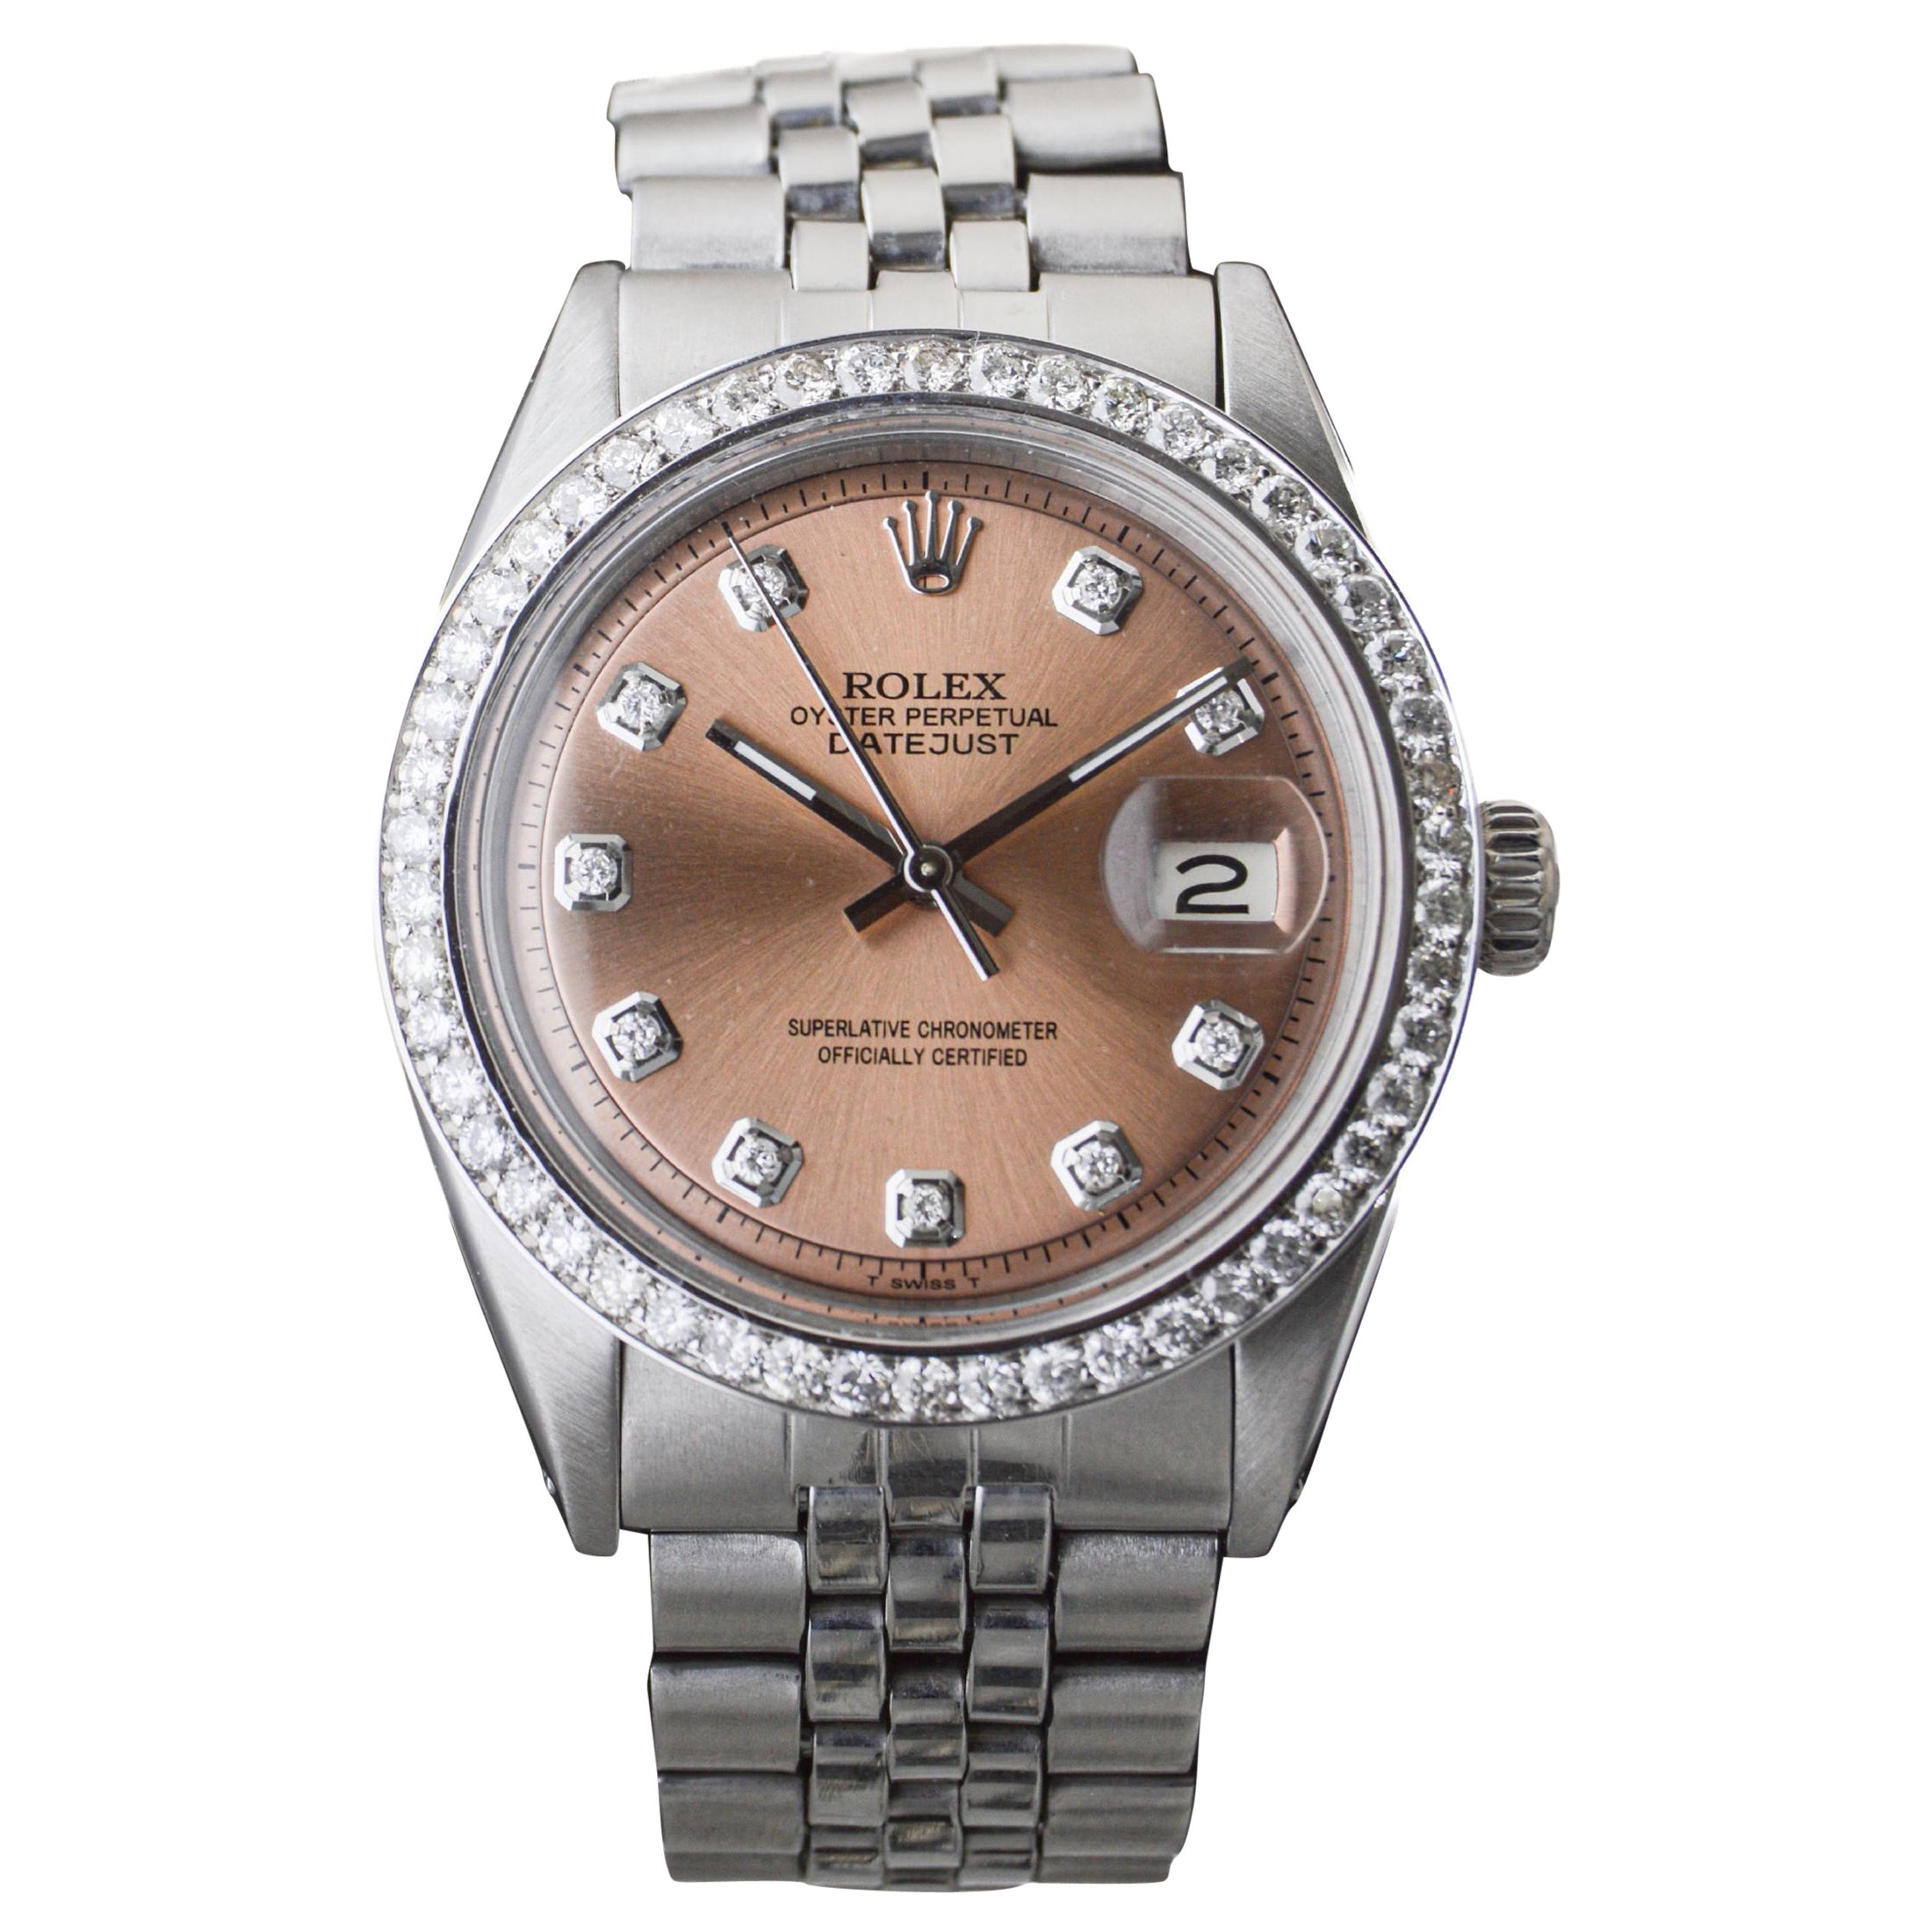 Rolex Stainless Steel Datejust Custom Finished Dial Diamond Bezel, circa 1970's For Sale